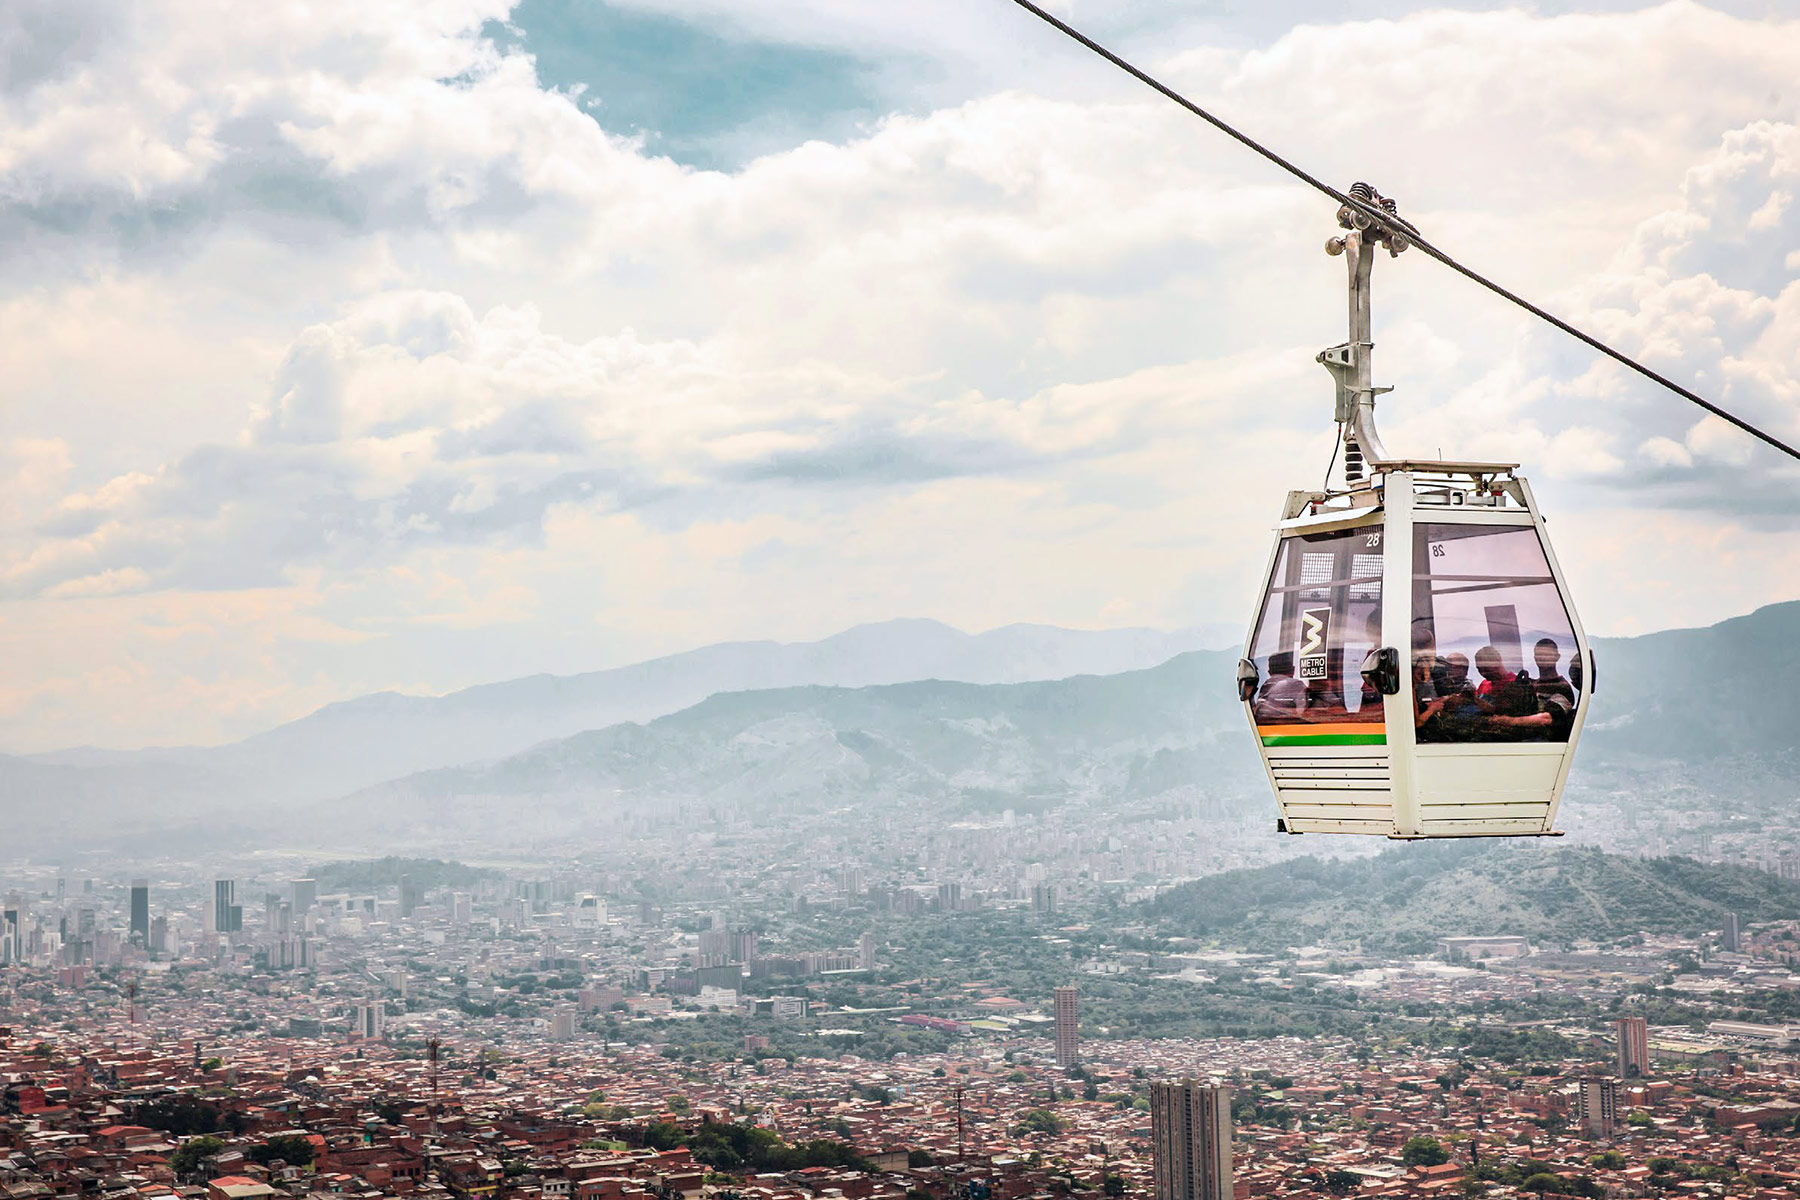 Metrocable in Medellin, Colombia. Detachable monocable gondola lift as mass urban transportation.